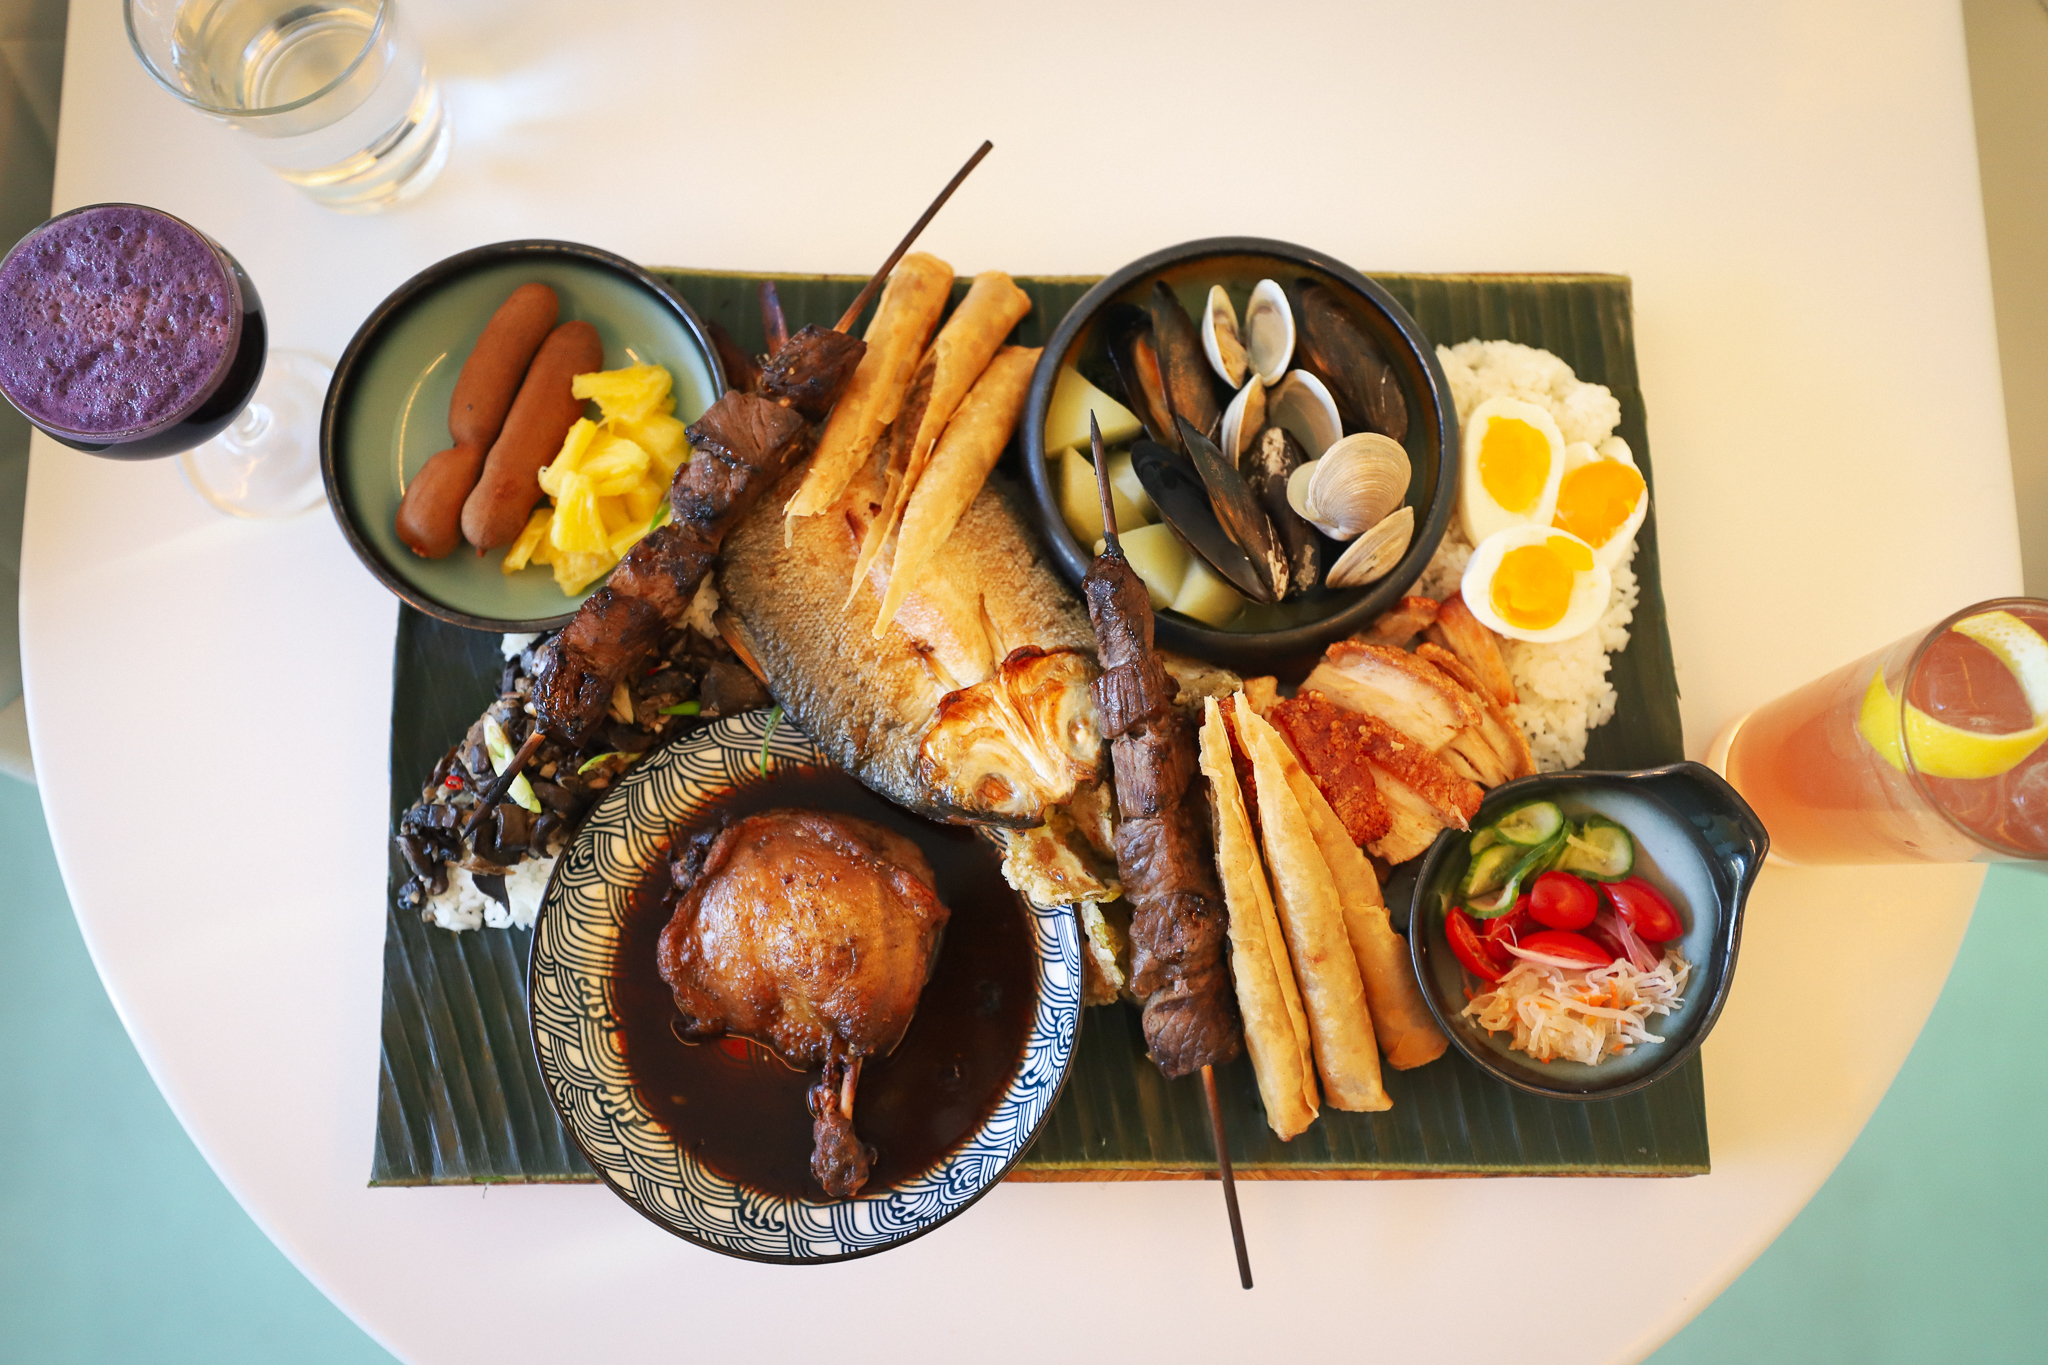 A single-person kamayan feast with food laid out on a green banana leaf the size of a placemat. Drinks are off to the sides.